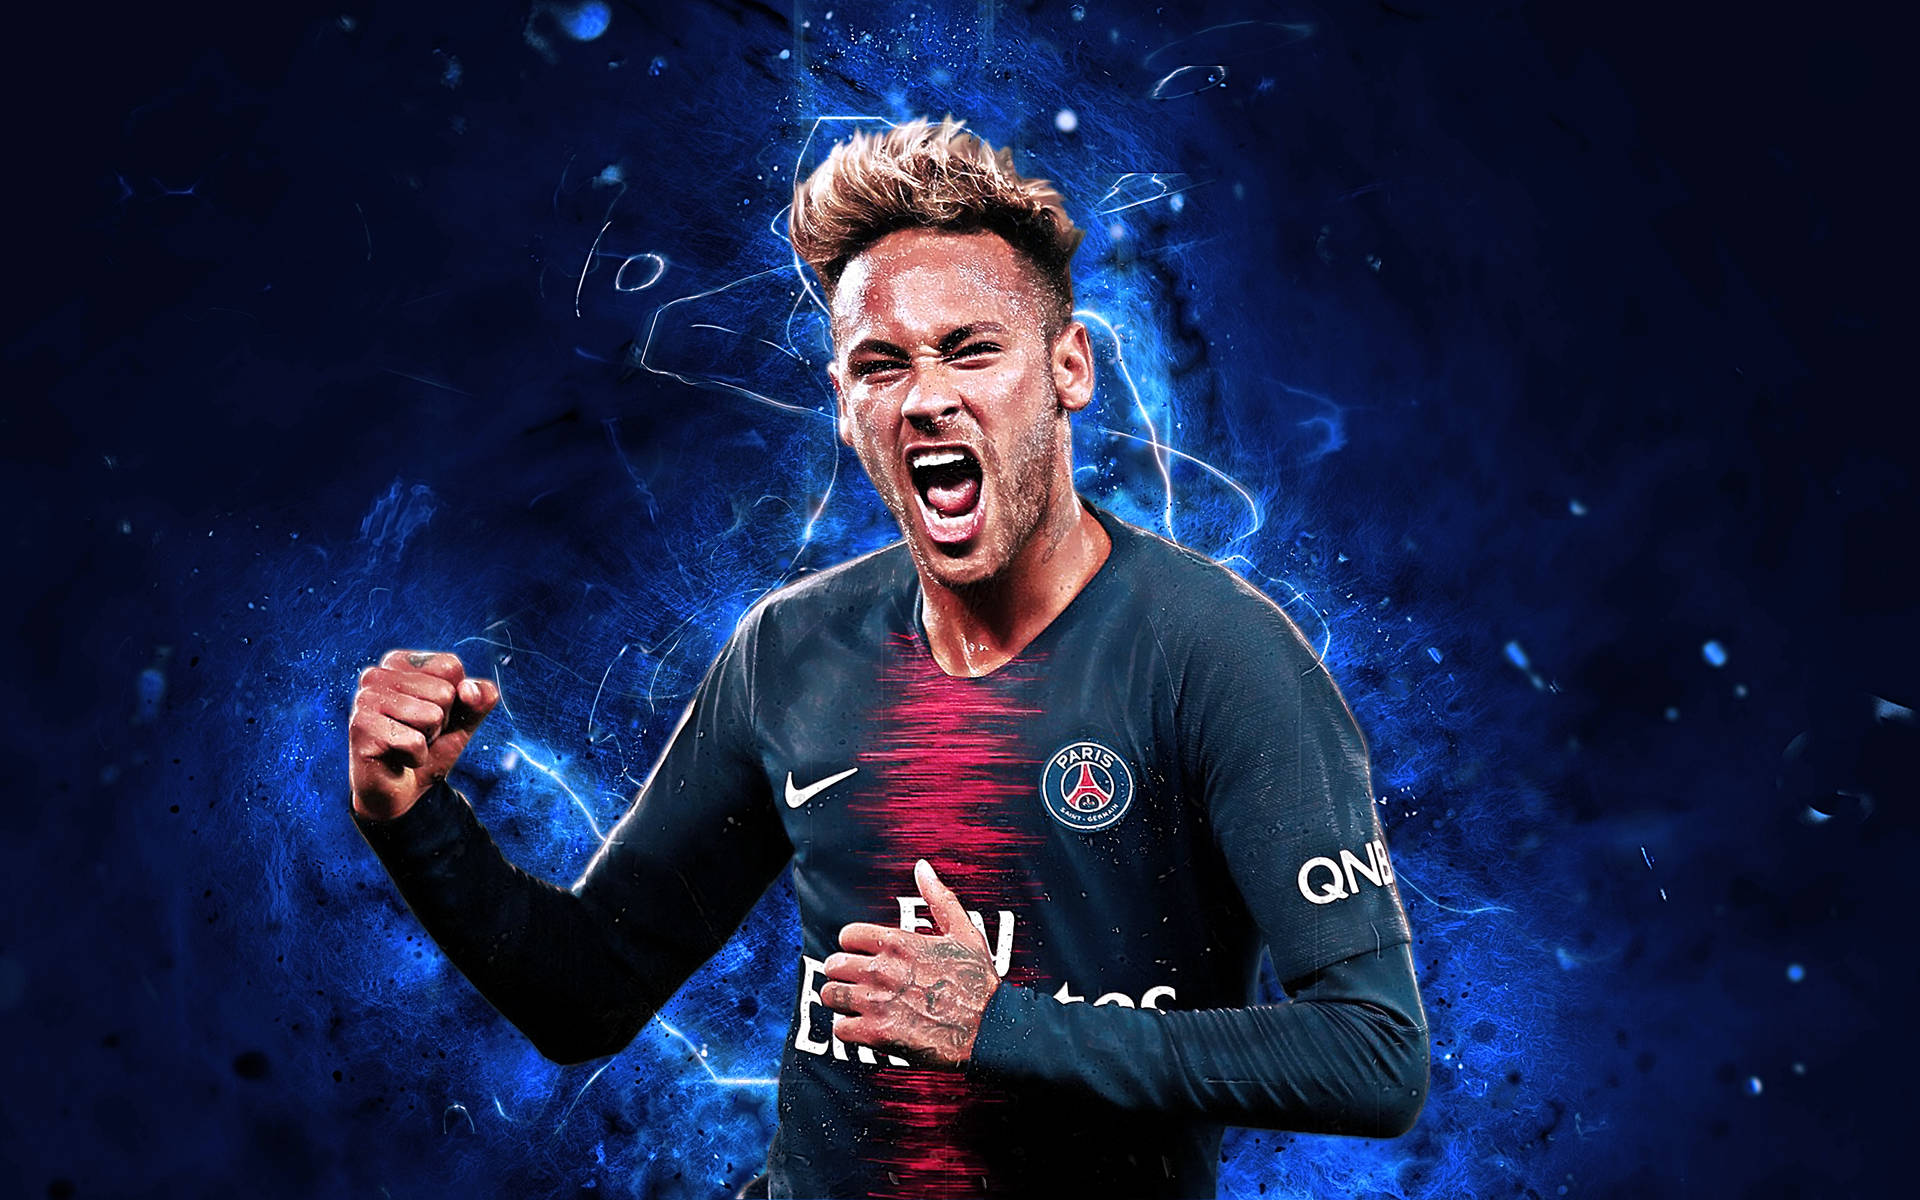 Neymar Celebrates A Goal With His Signature Air Punch. Background